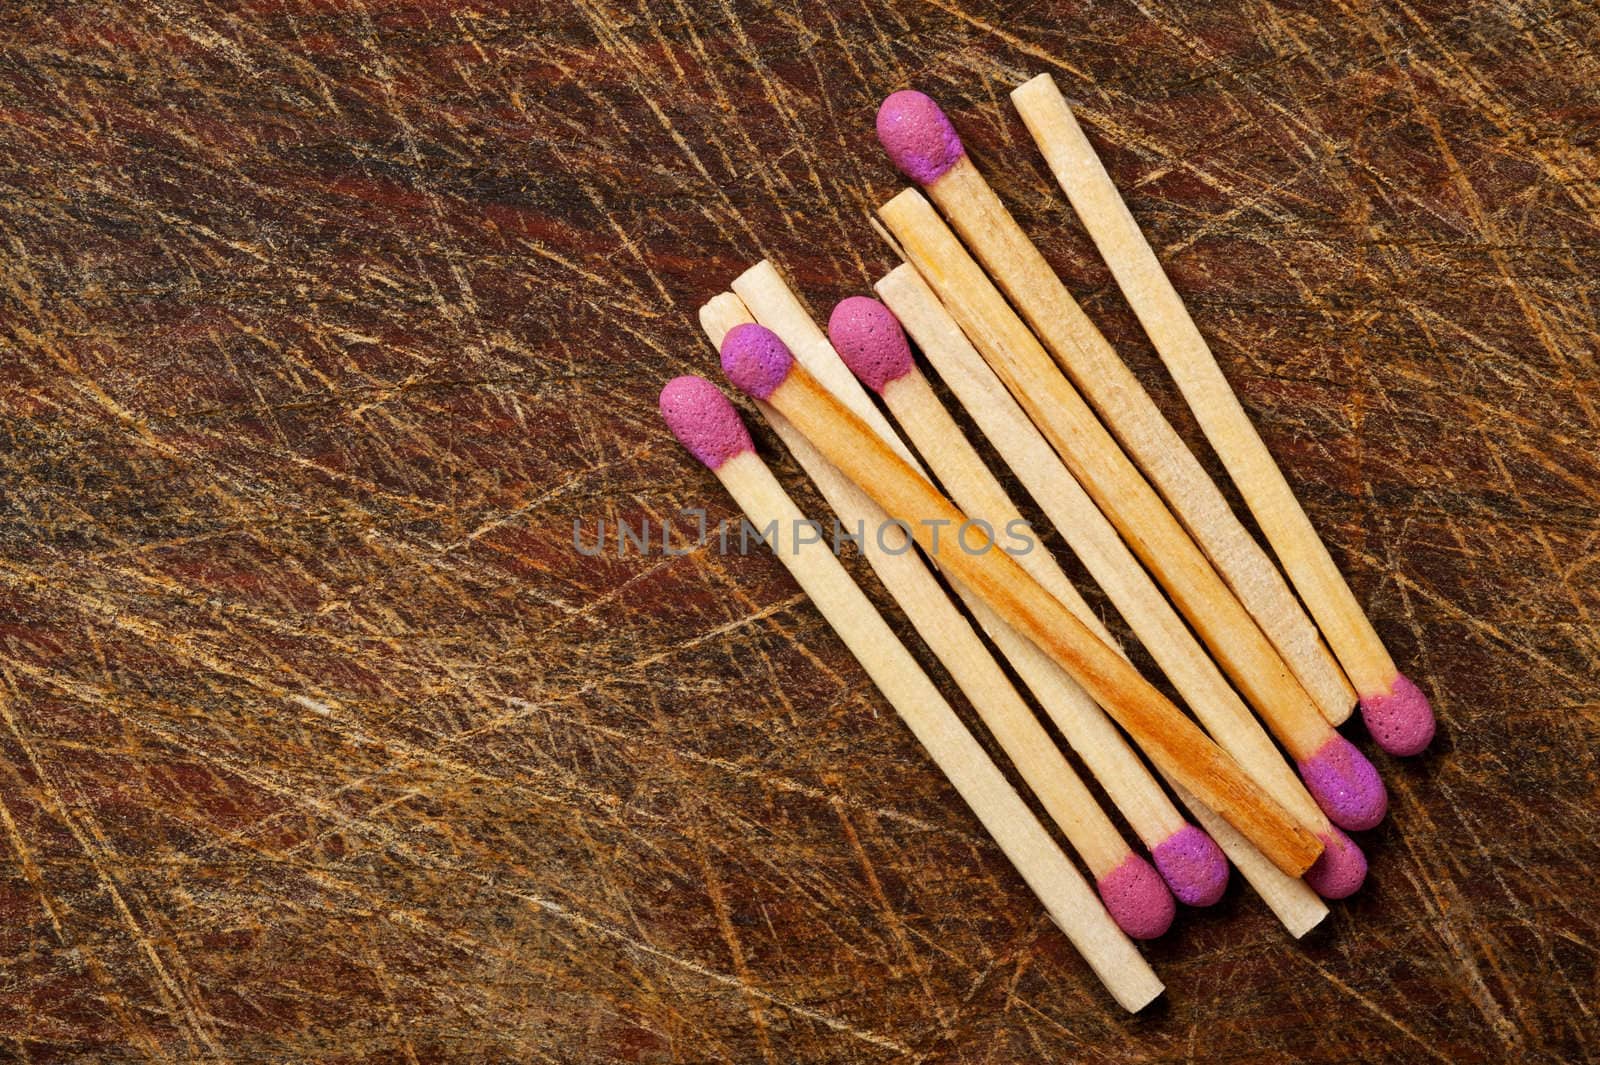 Group of matches on wooden table.